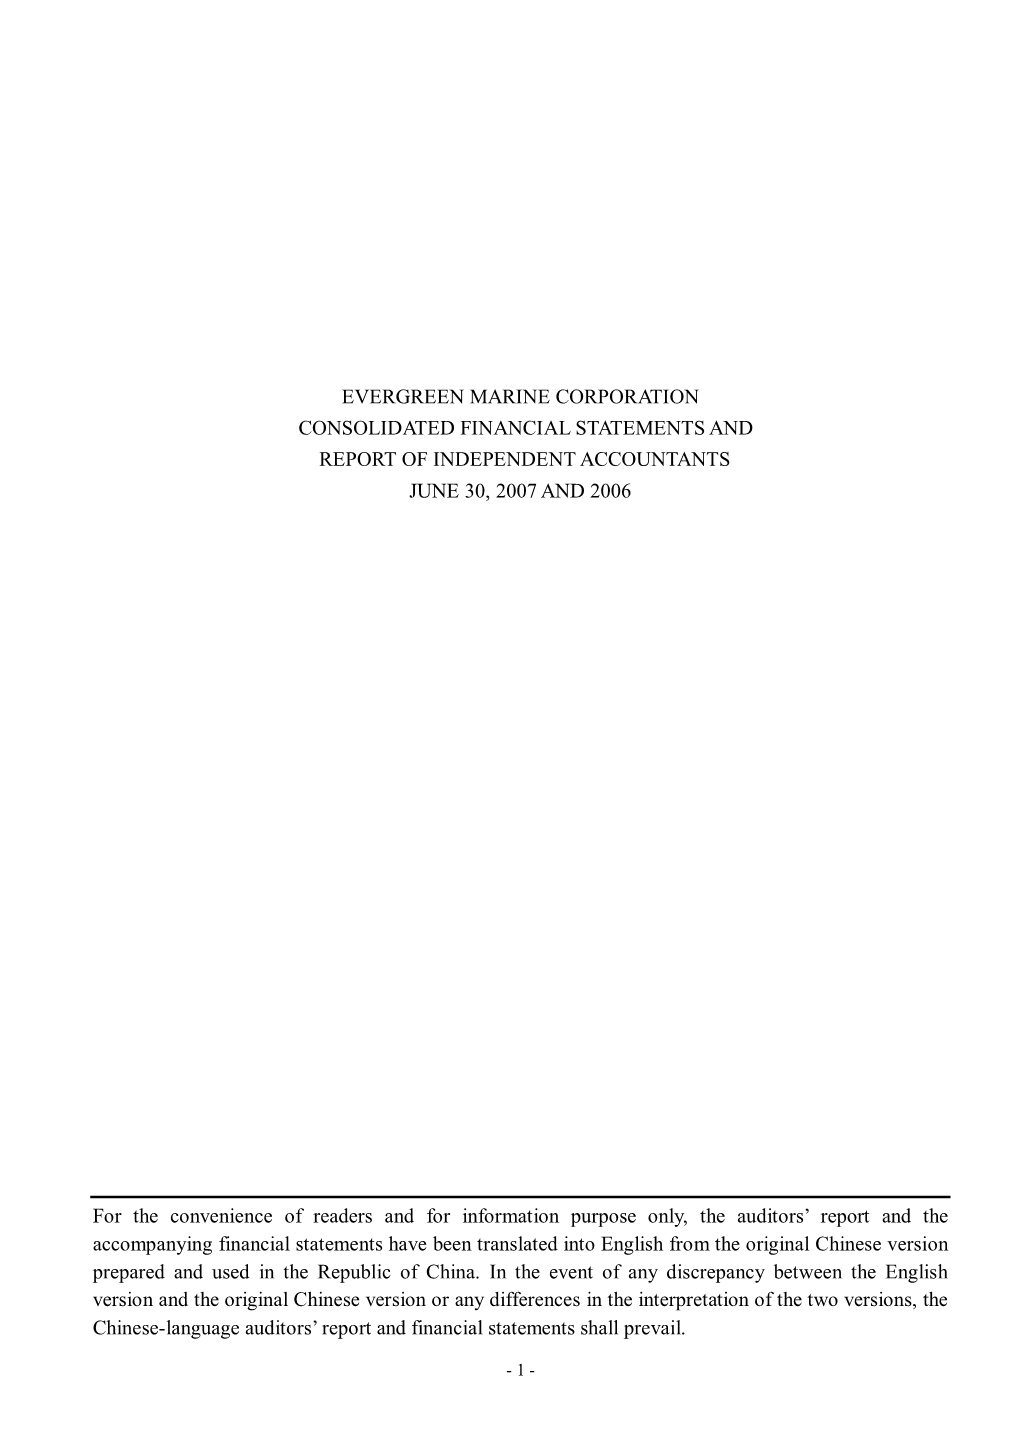 Evergreen Marine Corporation Consolidated Financial Statements and Report of Independent Accountants June 30, 2007 and 2006